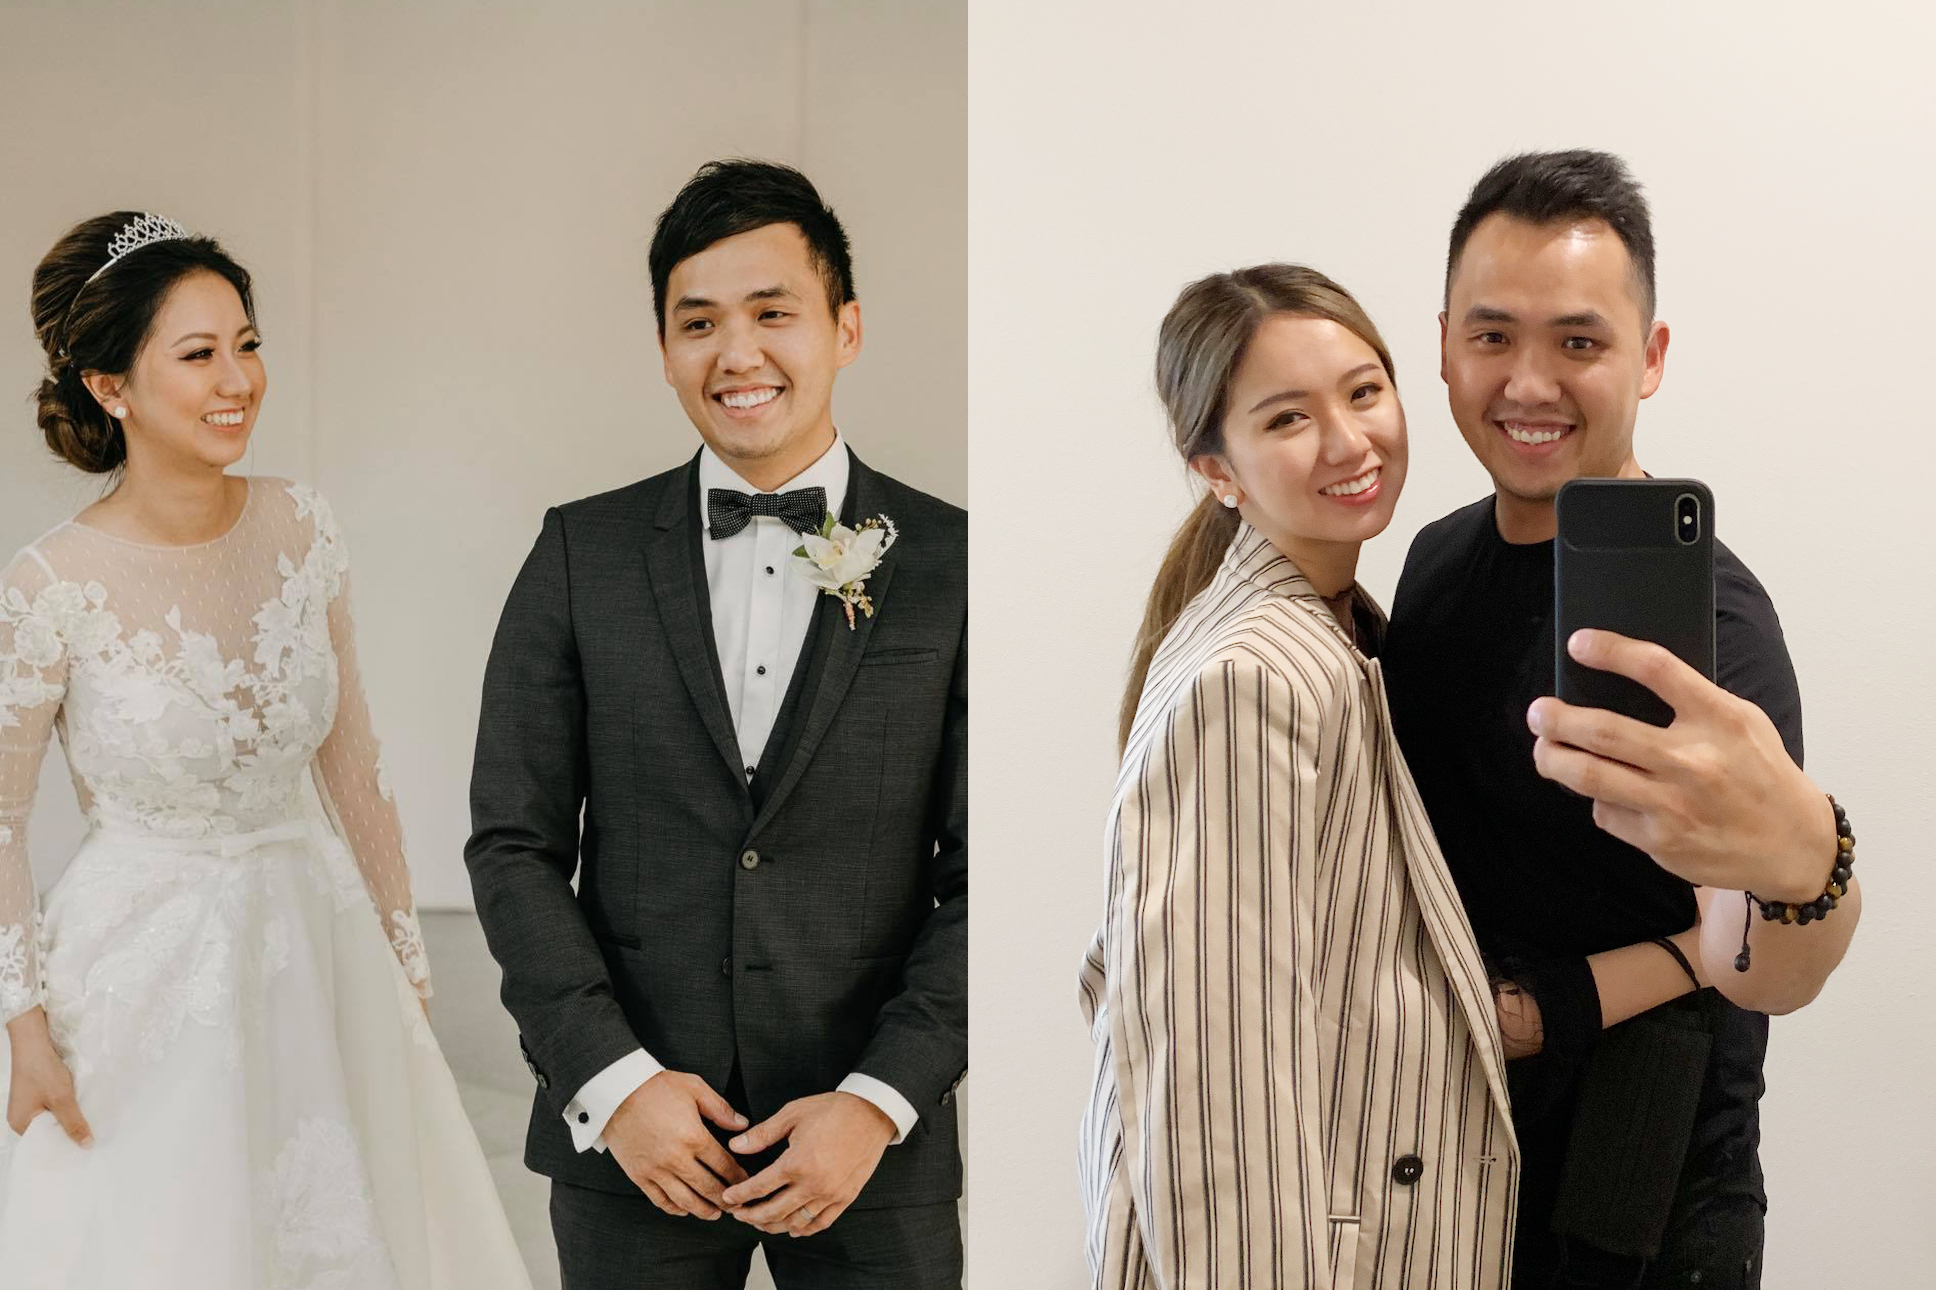 Han and Amy Lien put crypto on their wedding registry — and have hung on to what they received. “We’re HODLers for sure,” Han says.